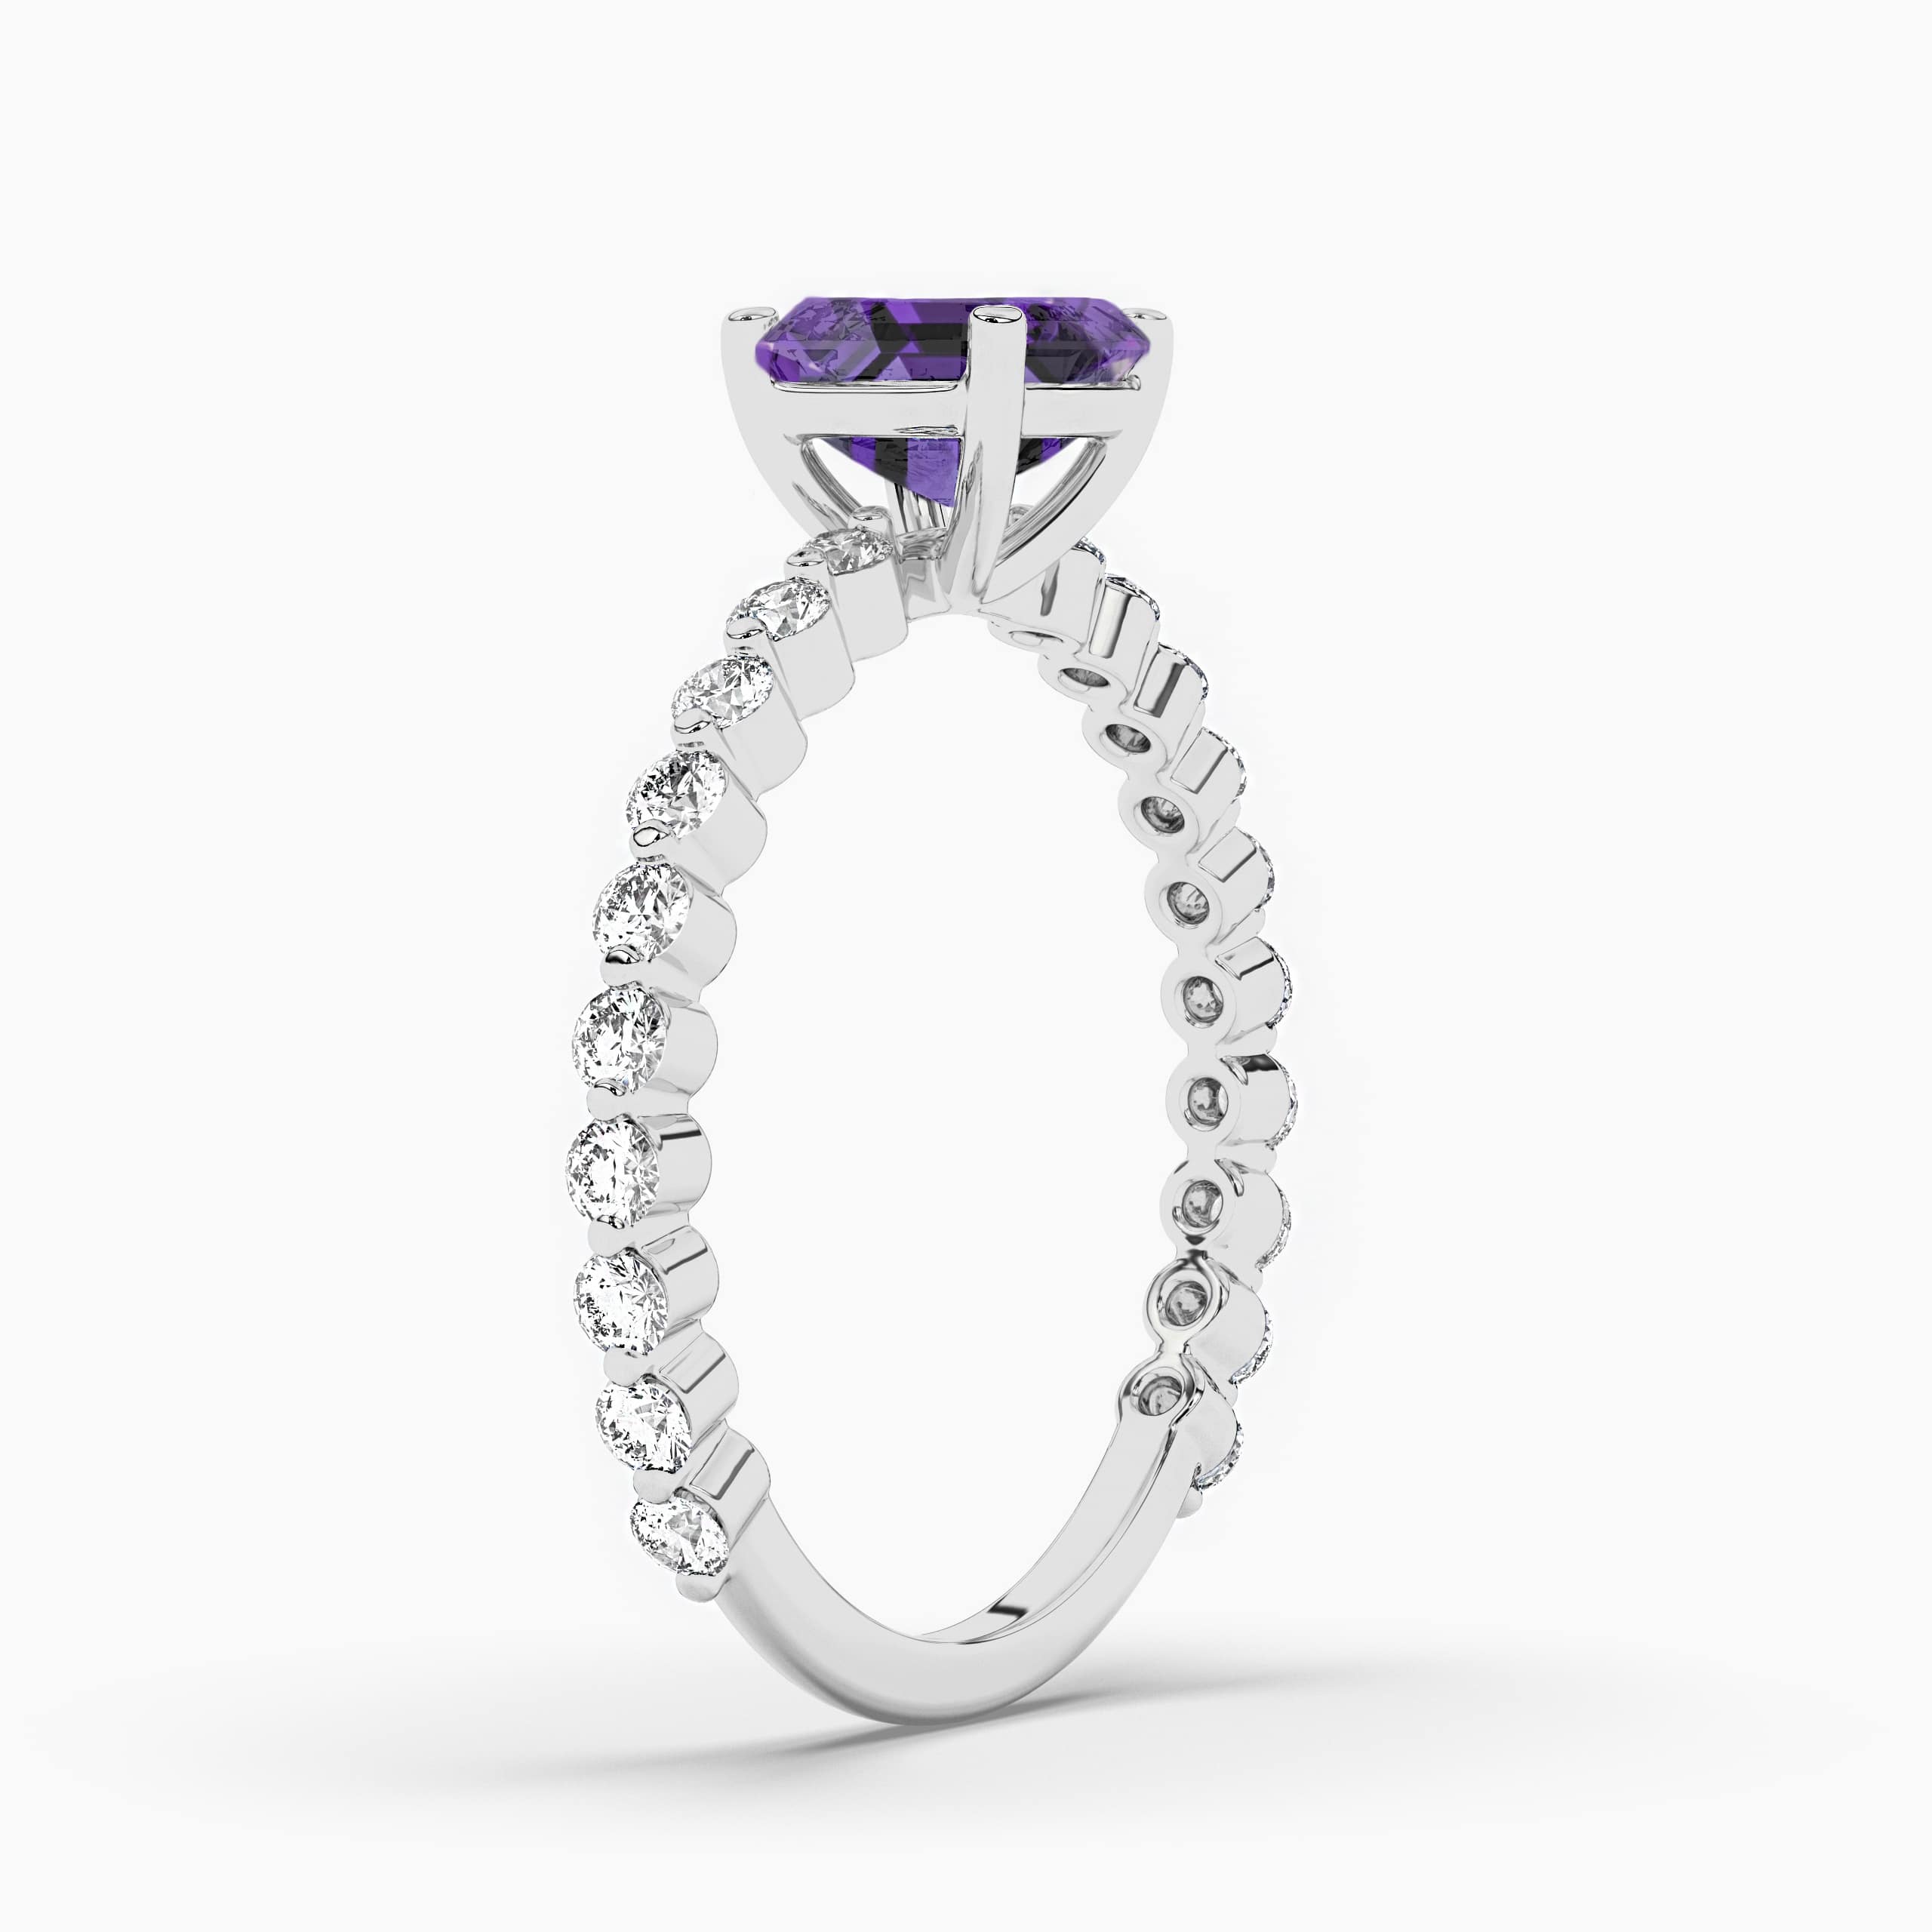 ASSCHER CUT AMETHYST AND DIAMOND RING IN WHITE GOLD